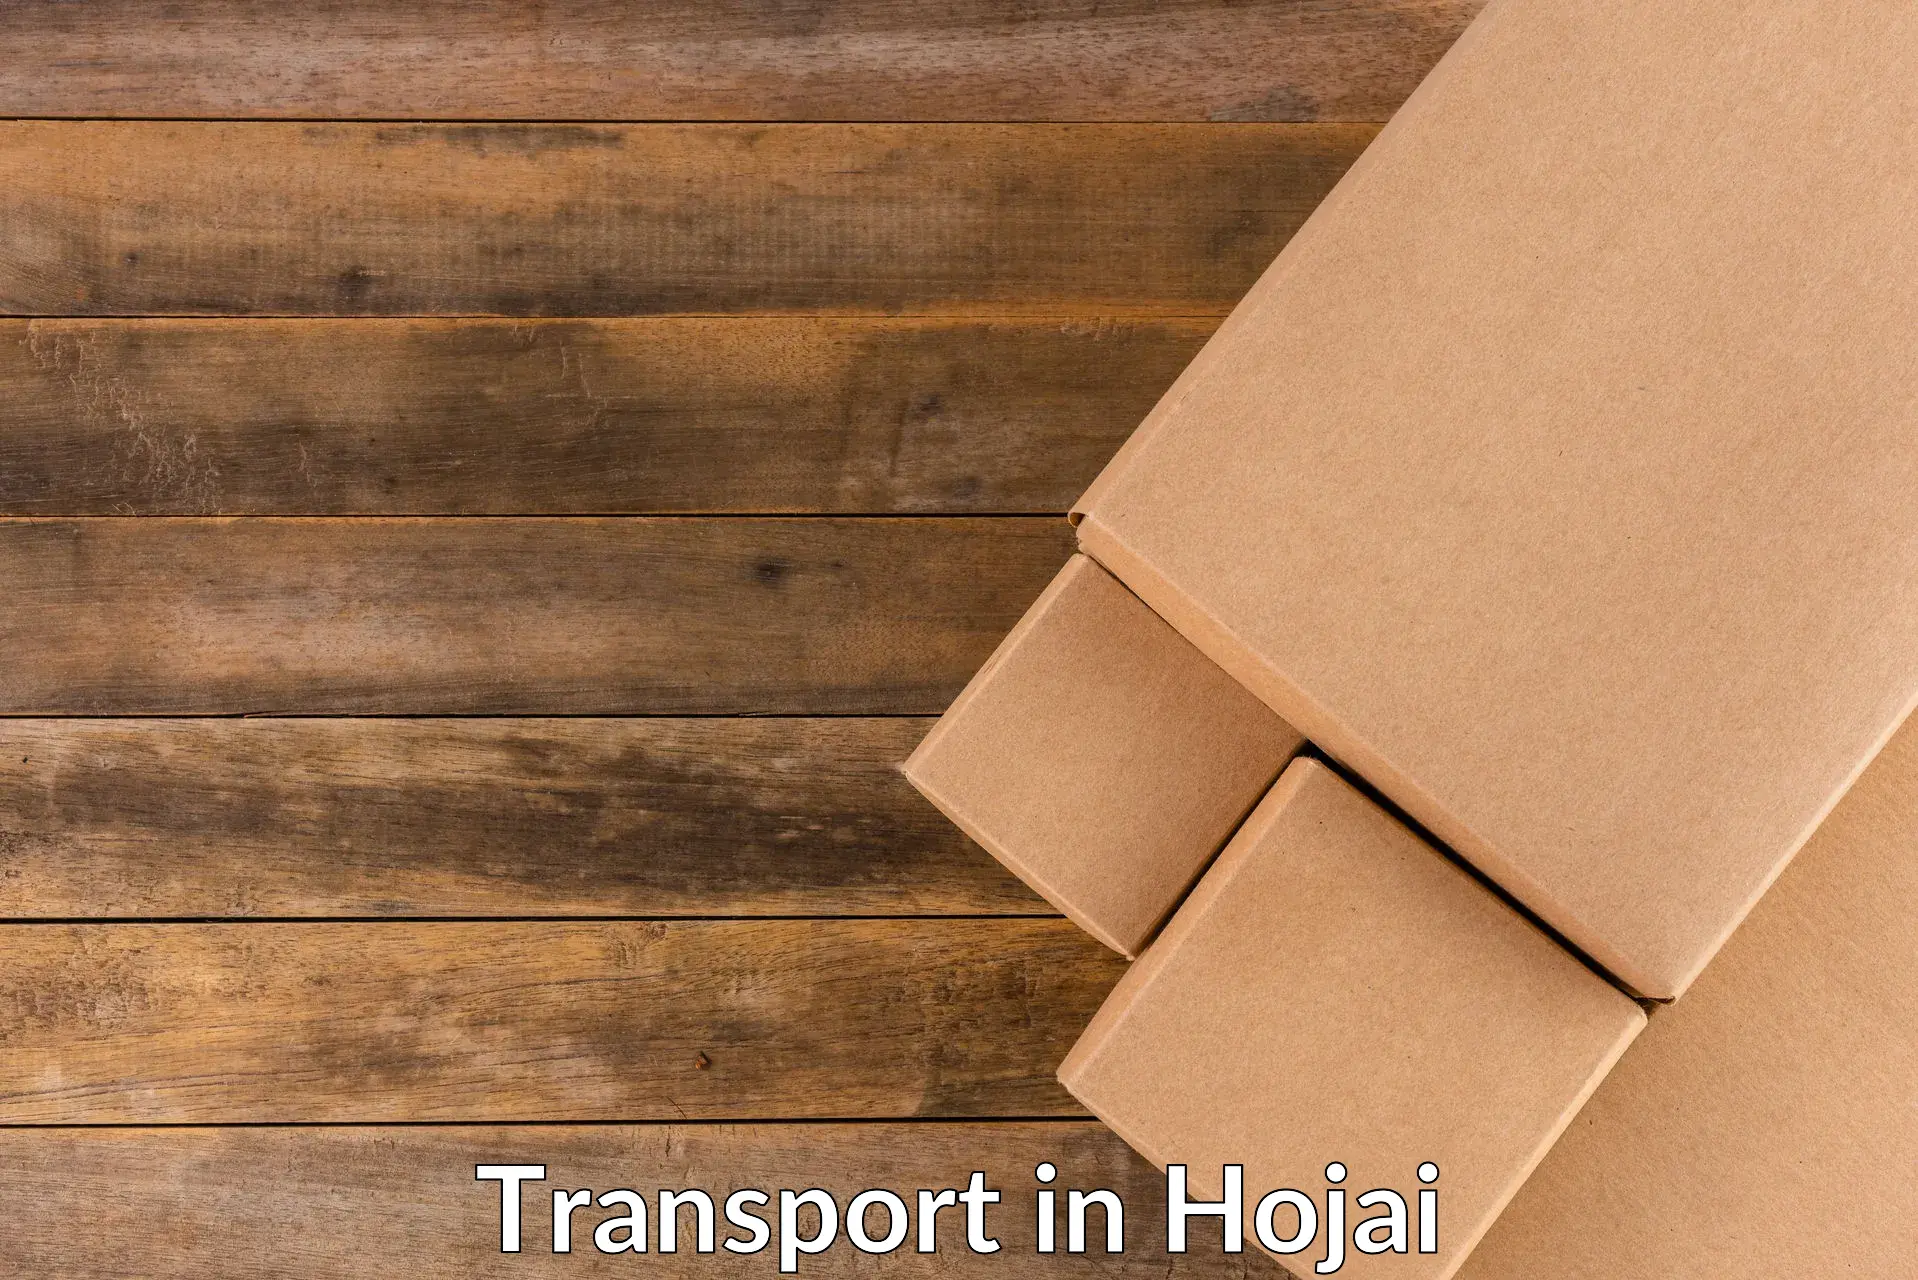 Air freight transport services in Hojai